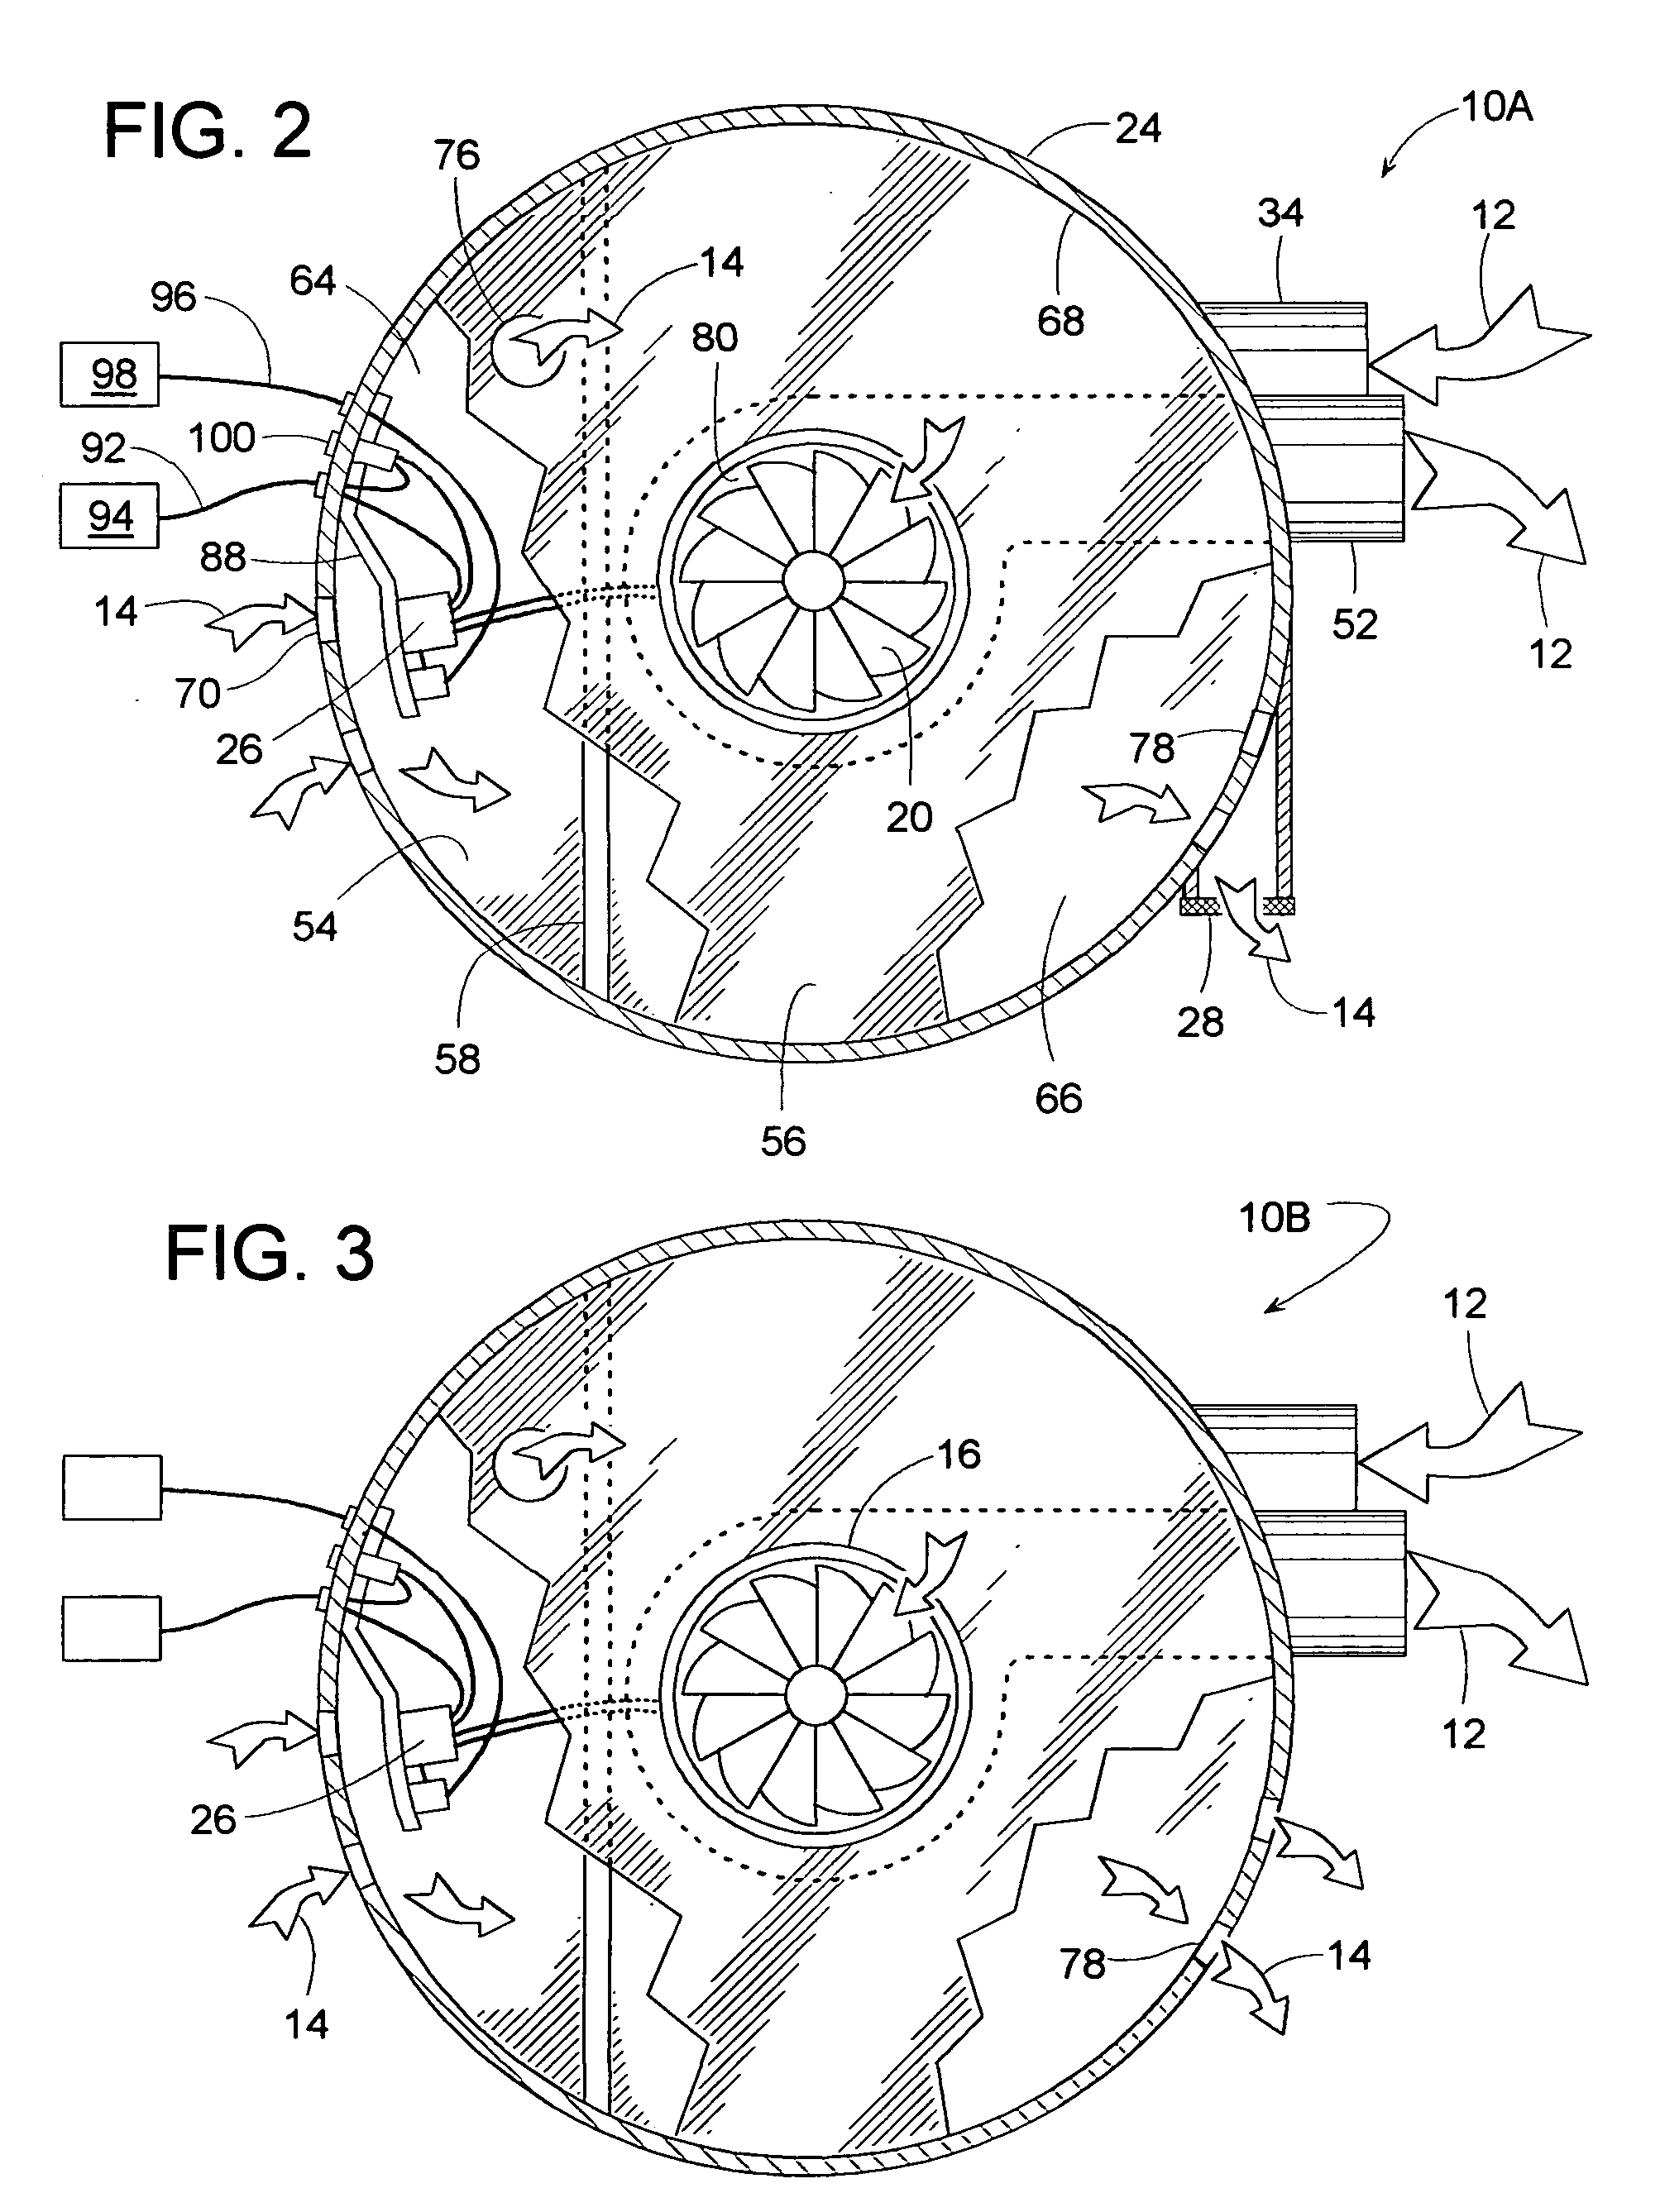 Central vacuum system with secondary airflow path